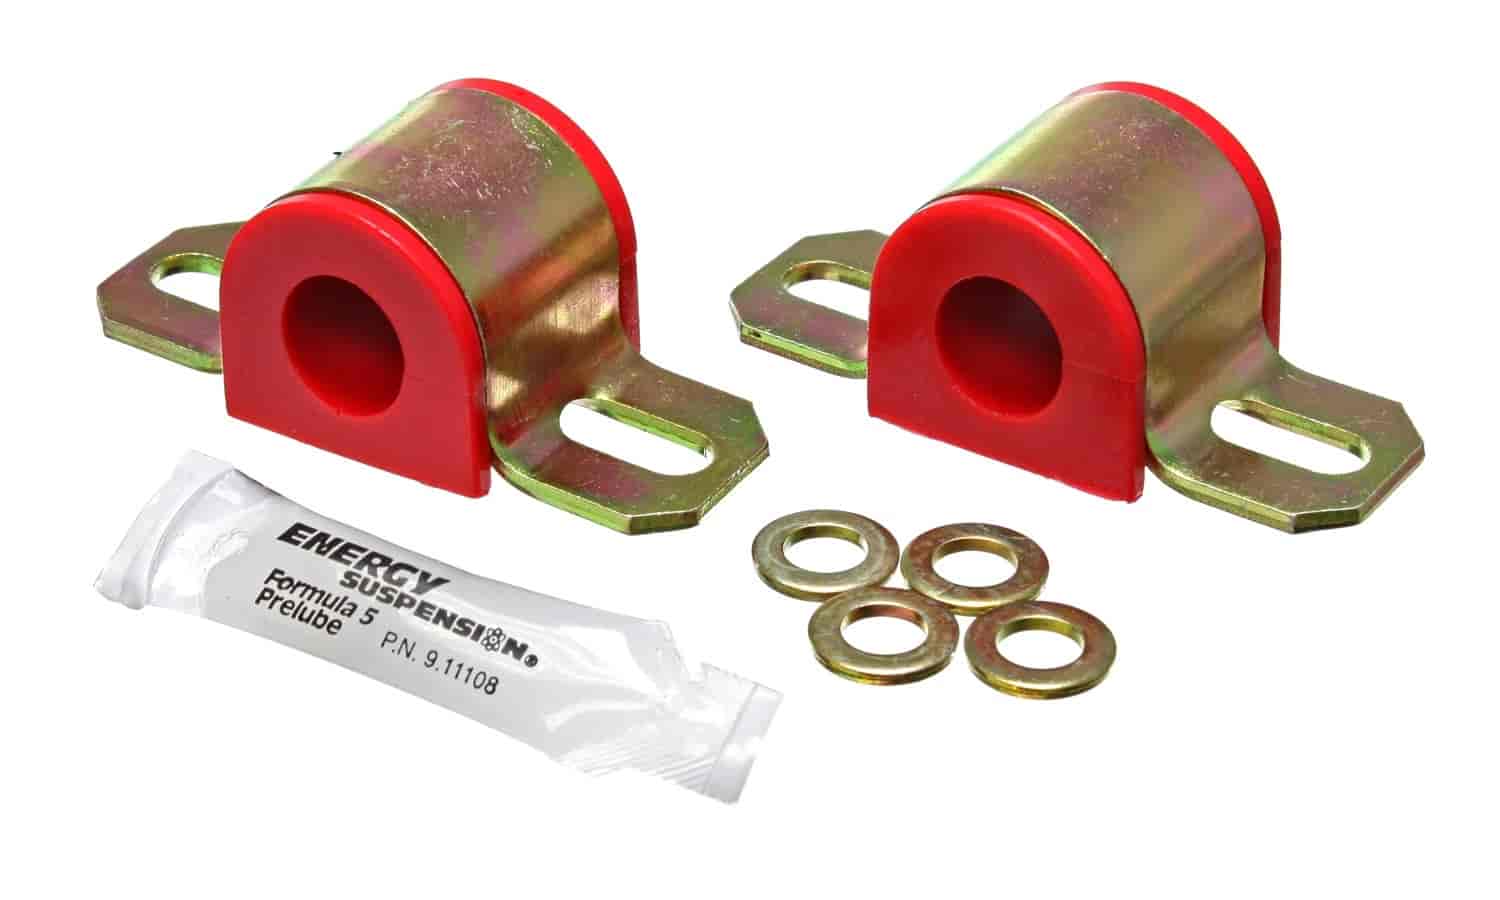 Universal Non-Greaseable Sway Bar Bushings 5/8" or 16mm